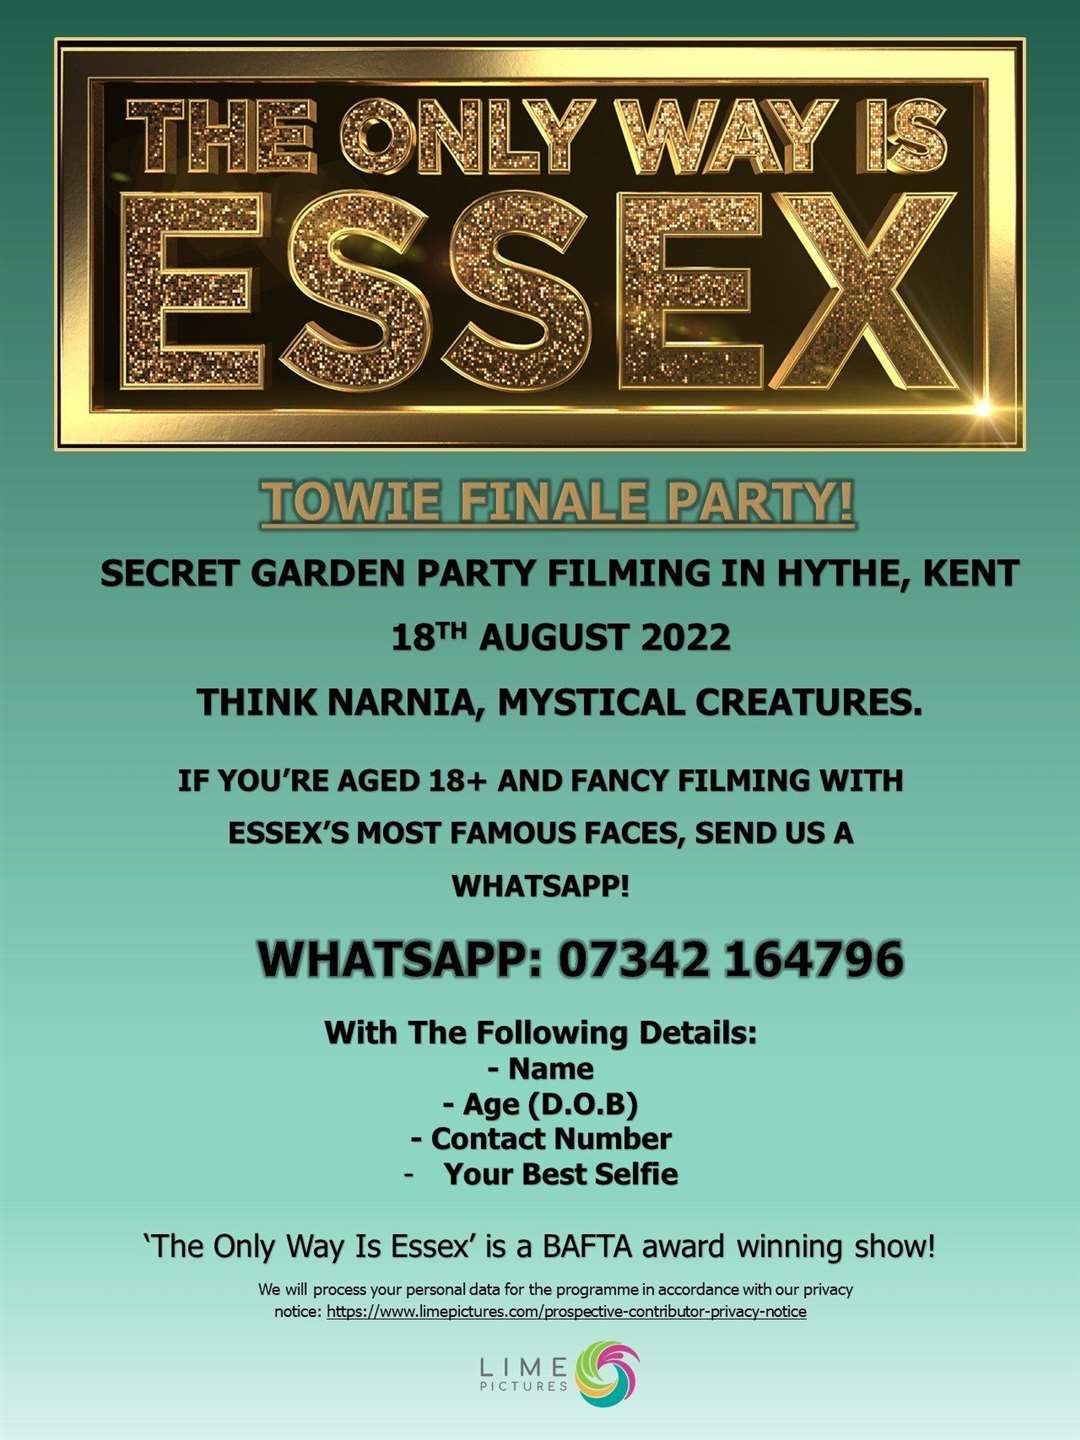 TOWIE is inviting people in Kent to appear in the last episode. Lime Pictures